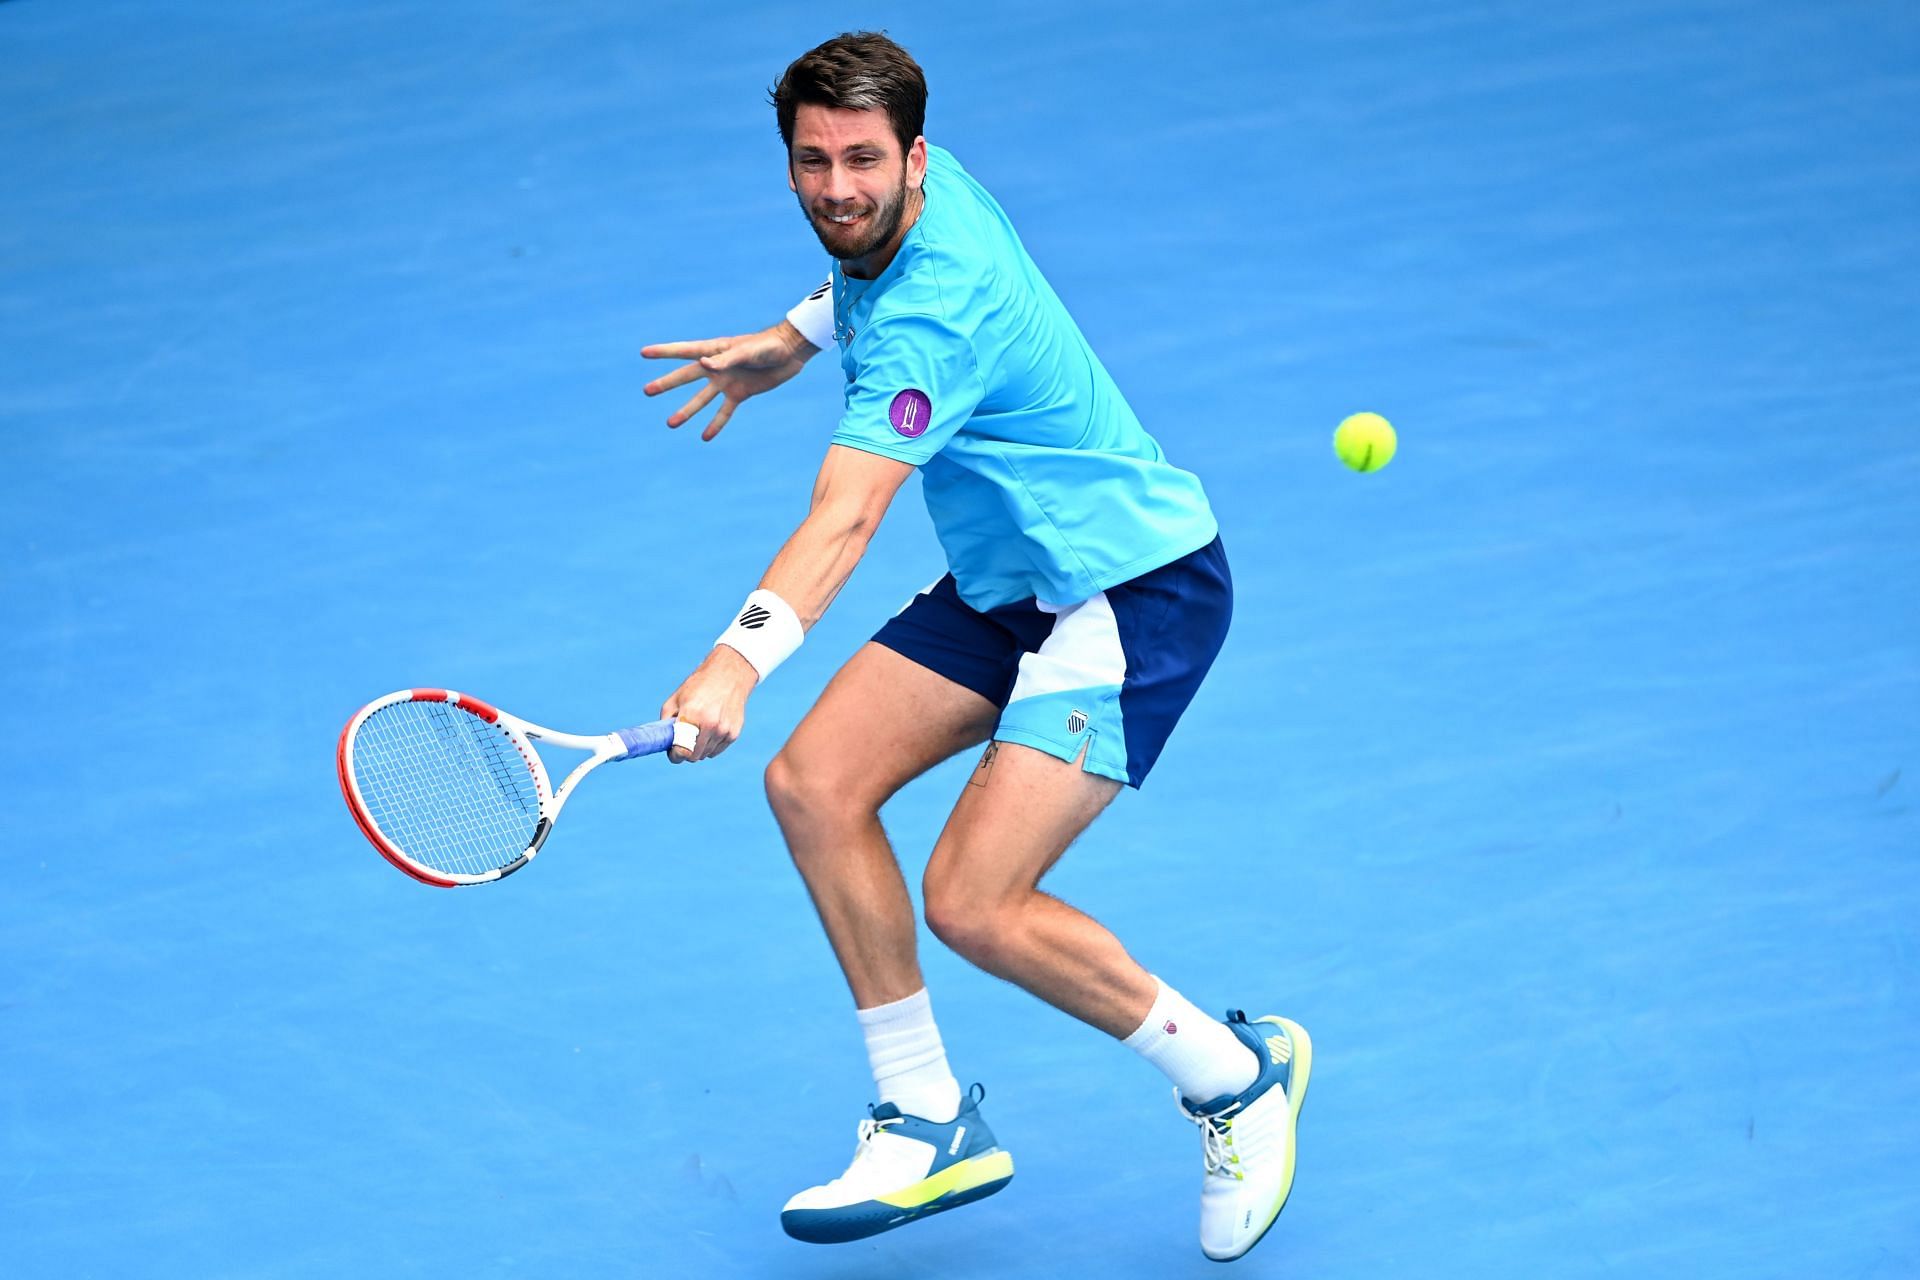 Cameron Norrie in action at the ASB Classic